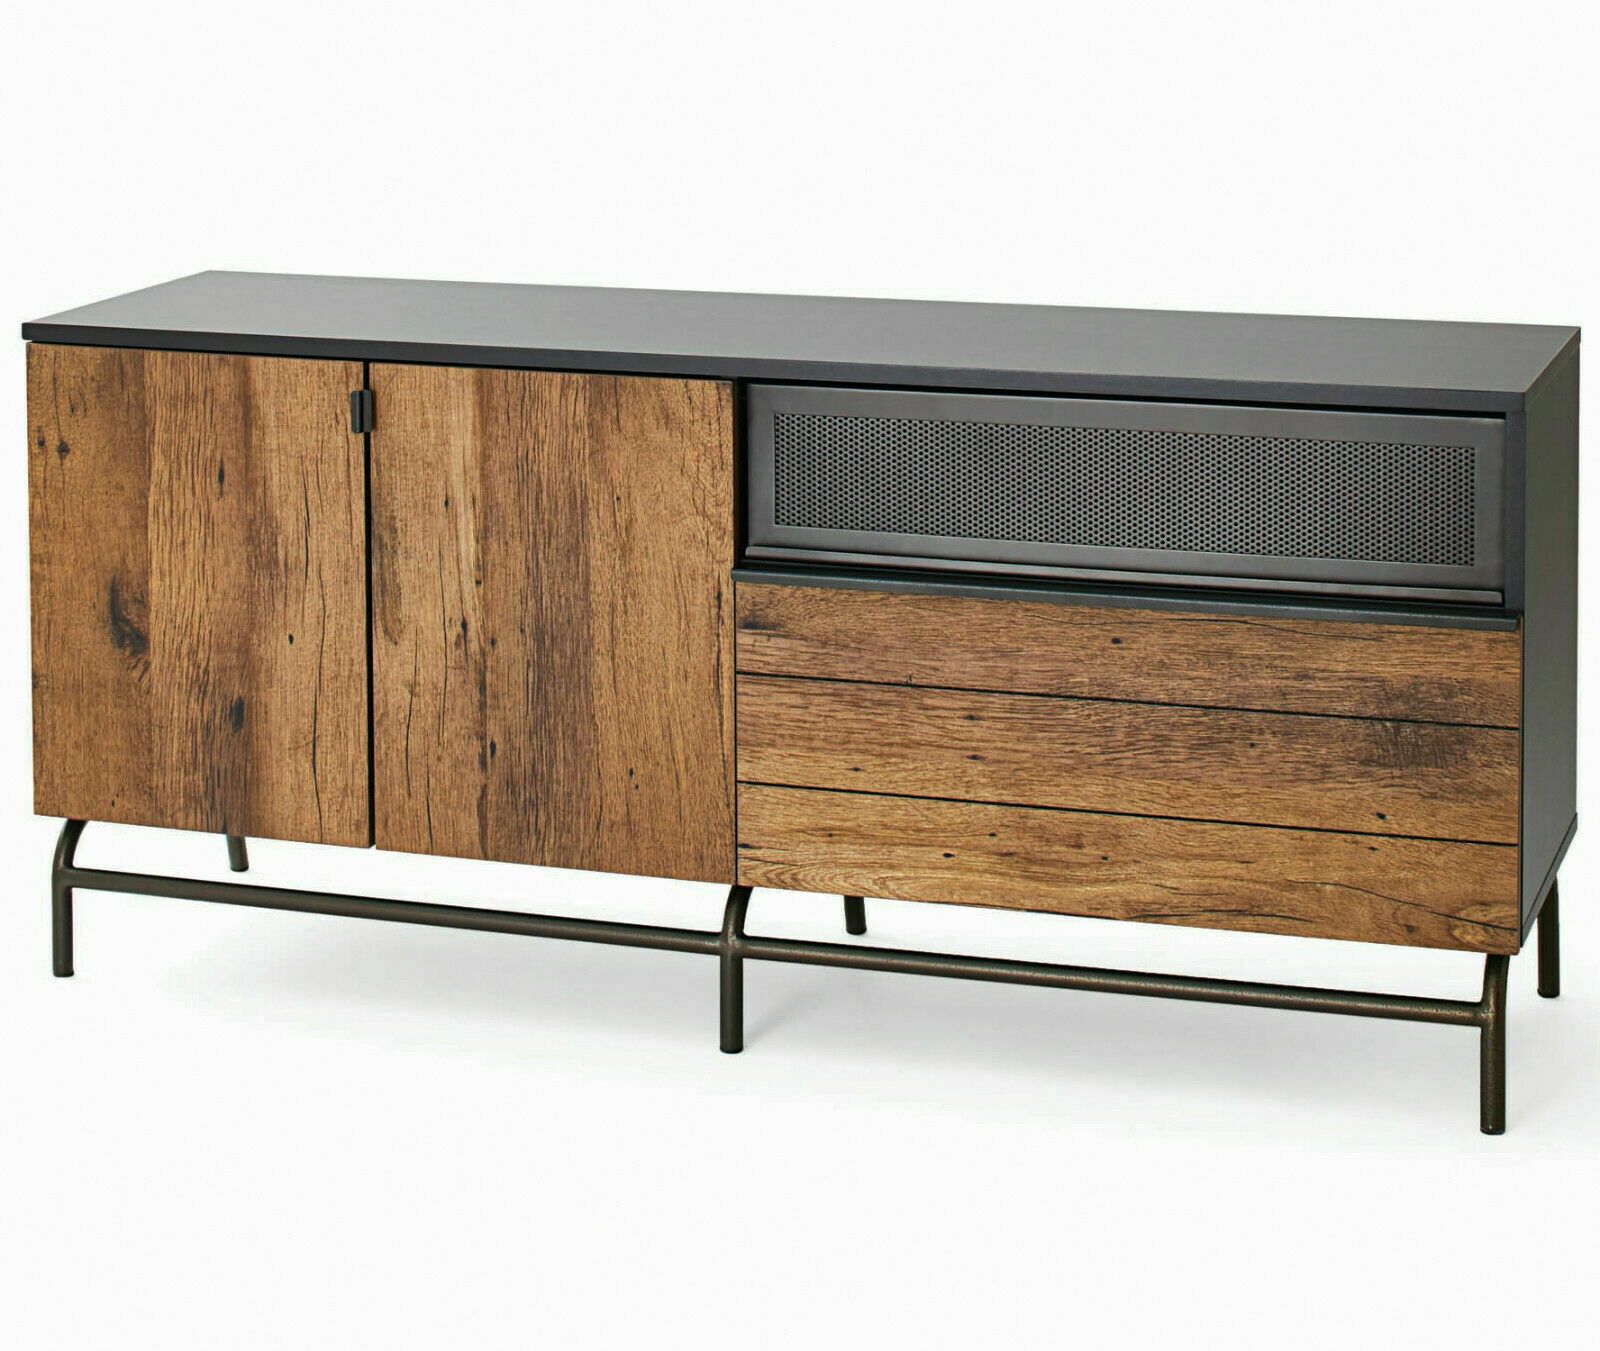 Tv Credenza 60" Entertainment Stand Credenza Oak Modern Rustic Sideboard  Buffet Throughout Mid Century Retro Modern Oak And Espresso Wood Buffets (View 30 of 30)